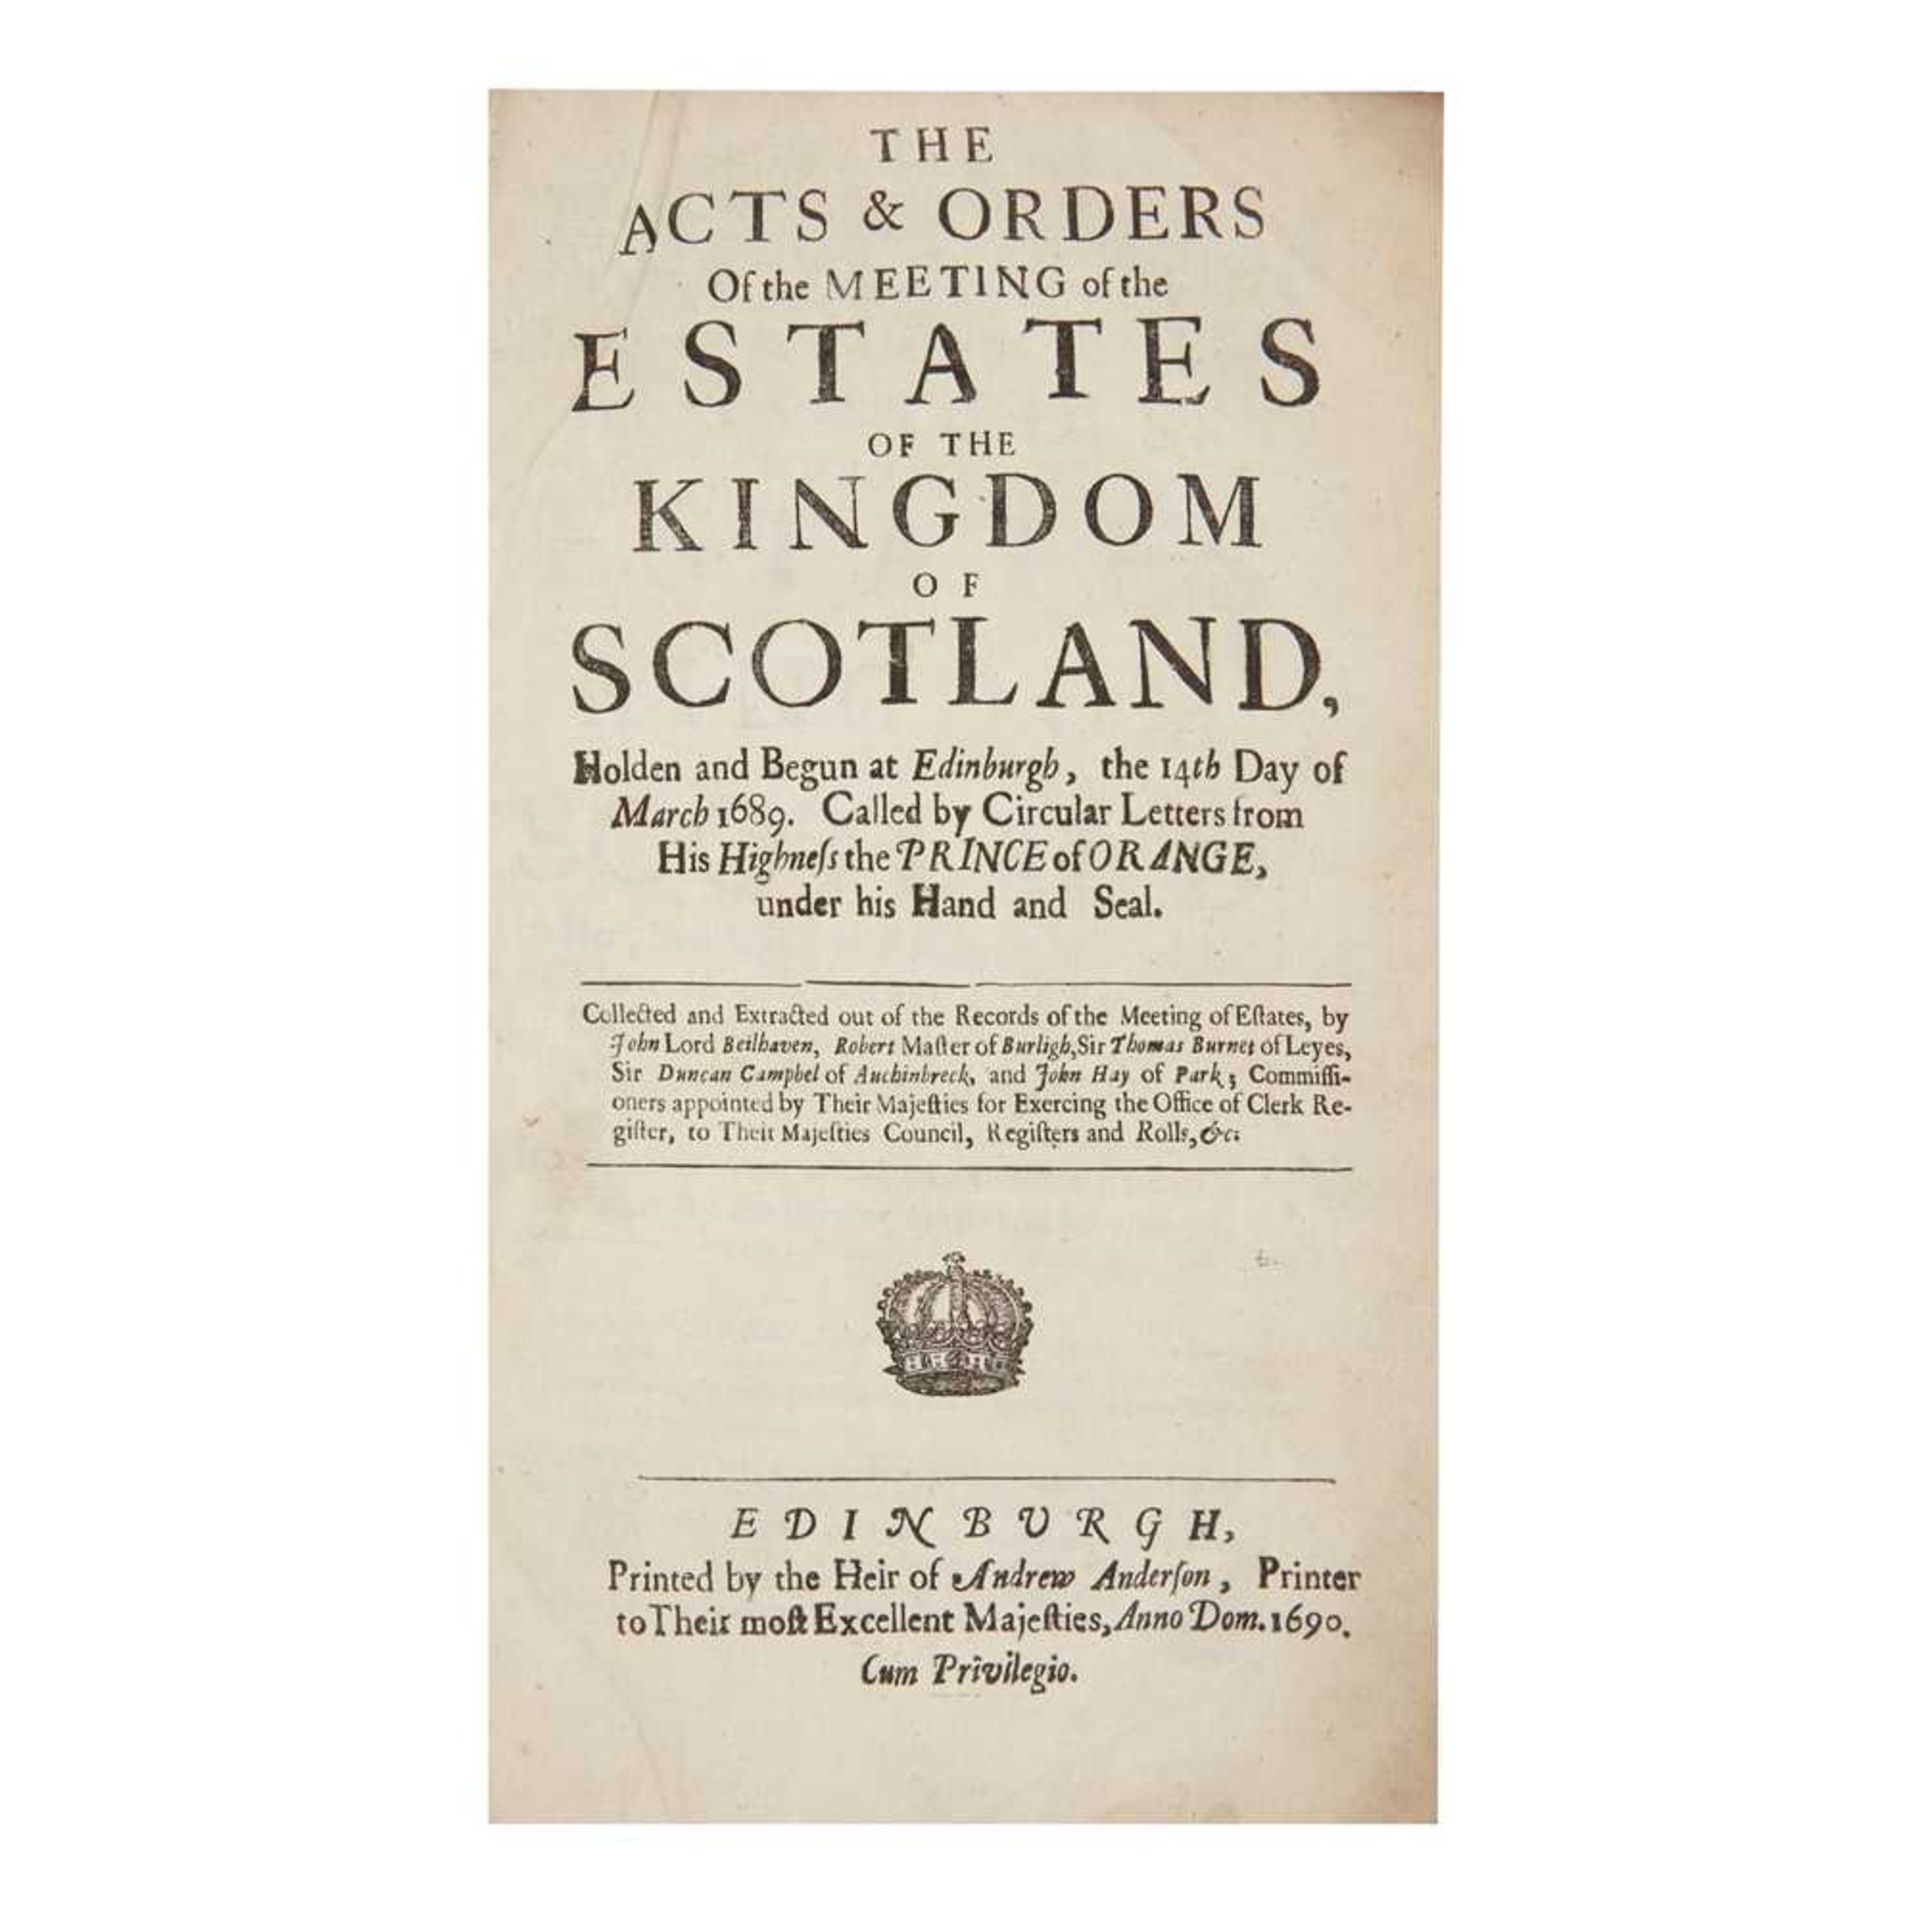 Scotland - Laws and Acts comprising The acts and orders of the meeting of the Estates of the Kingdom